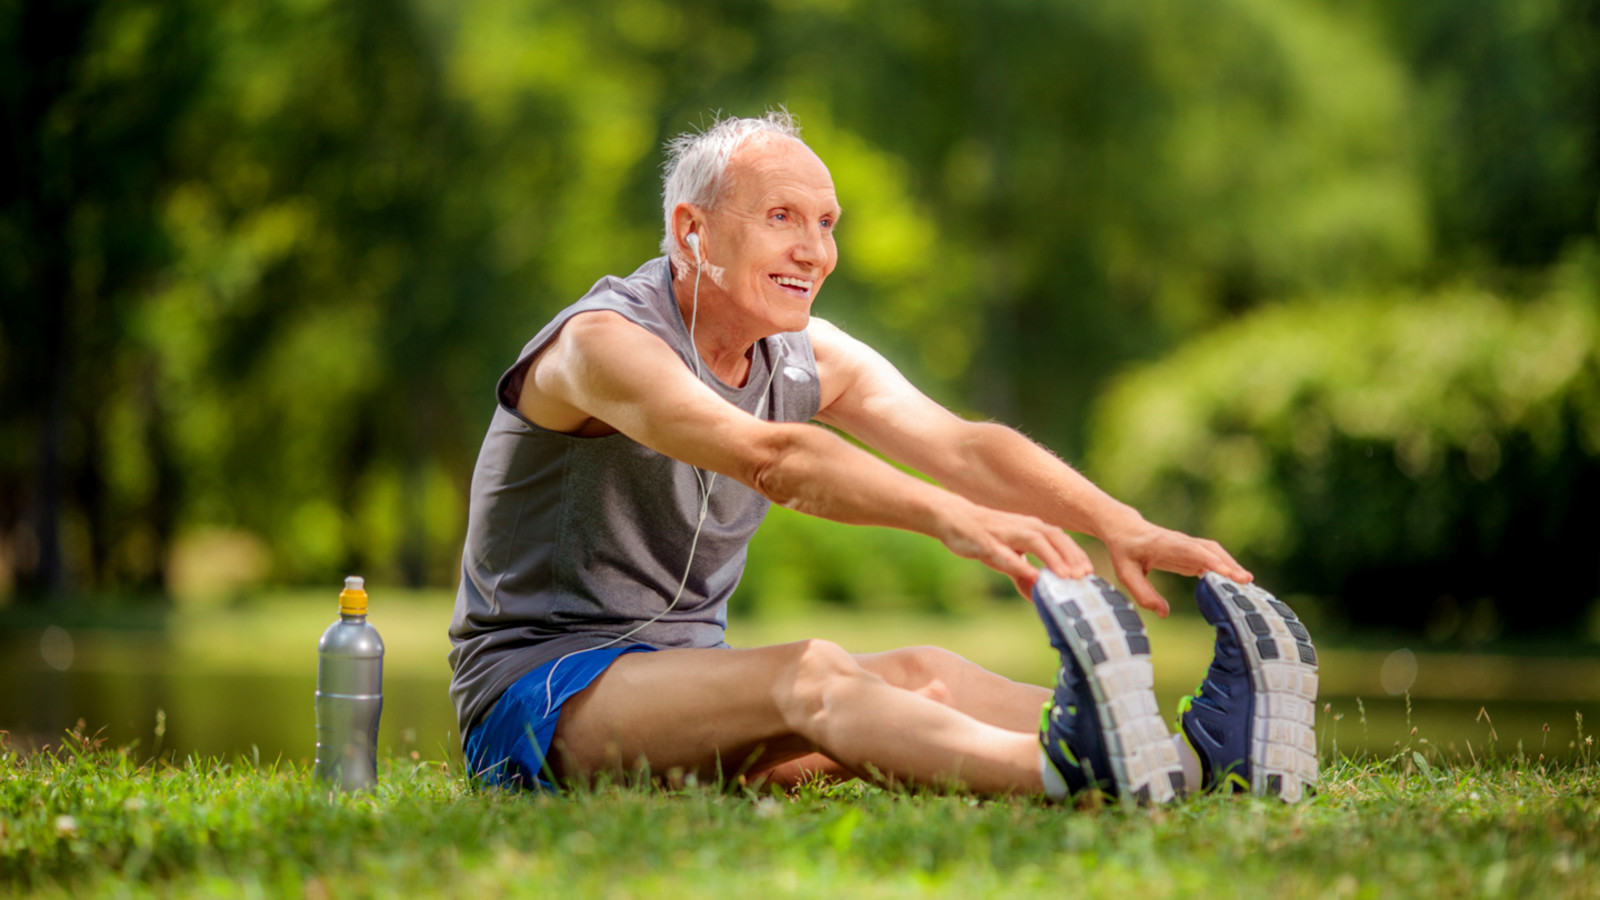 Exercise prevents cellular aging by boosting mitochondria